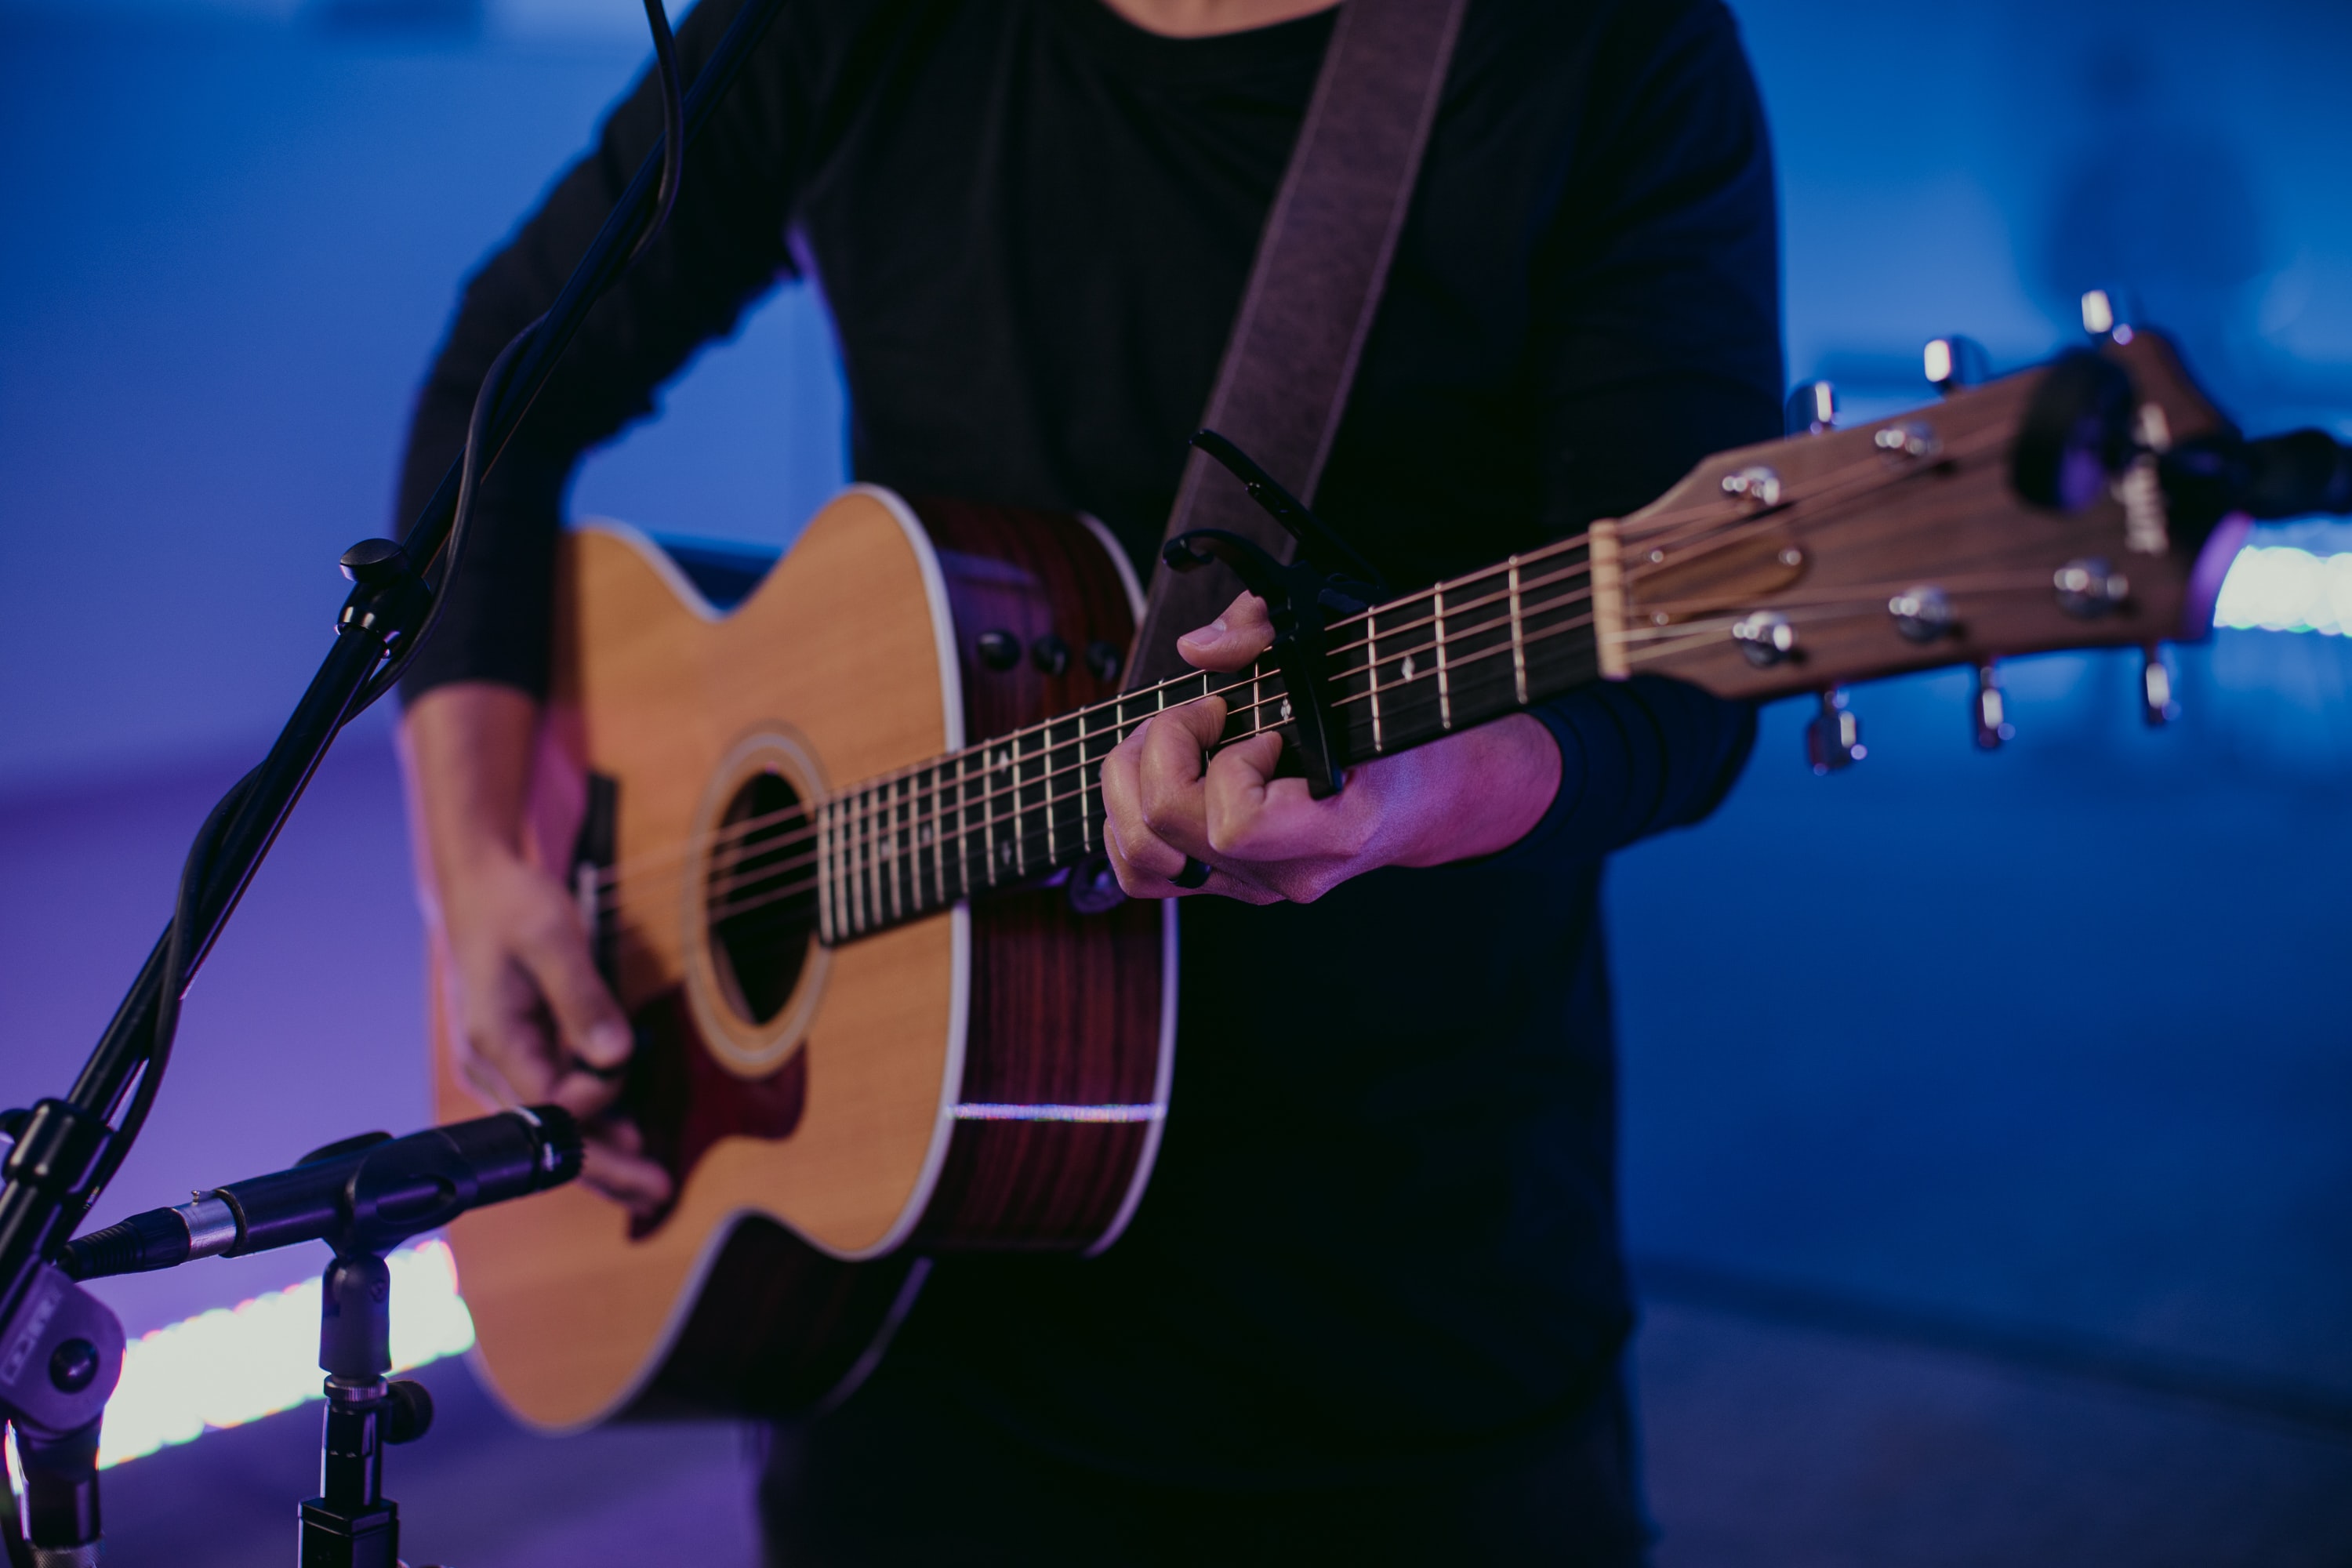 Man playing acoustic guitar. Best guitar effects pedals for acoustic guitar.